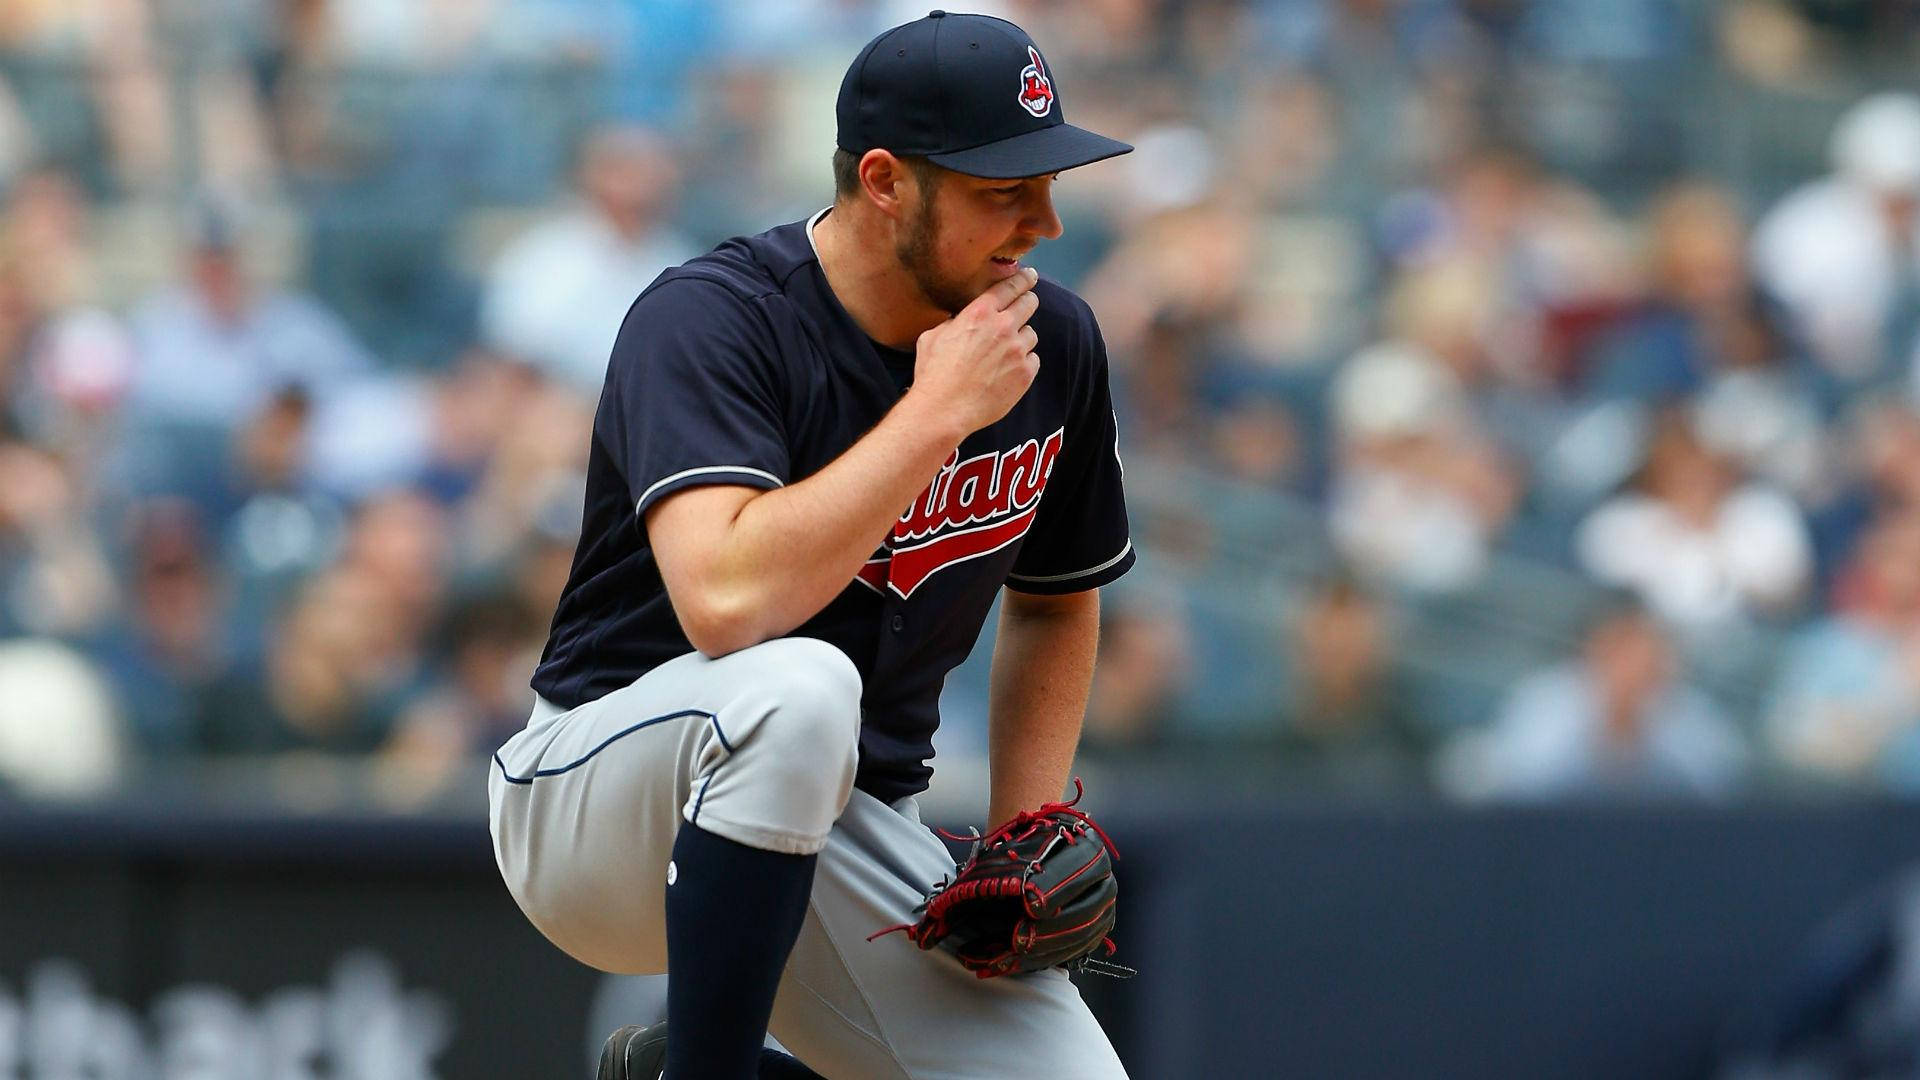 Trevor Bauer Crouching During A Game Wallpaper